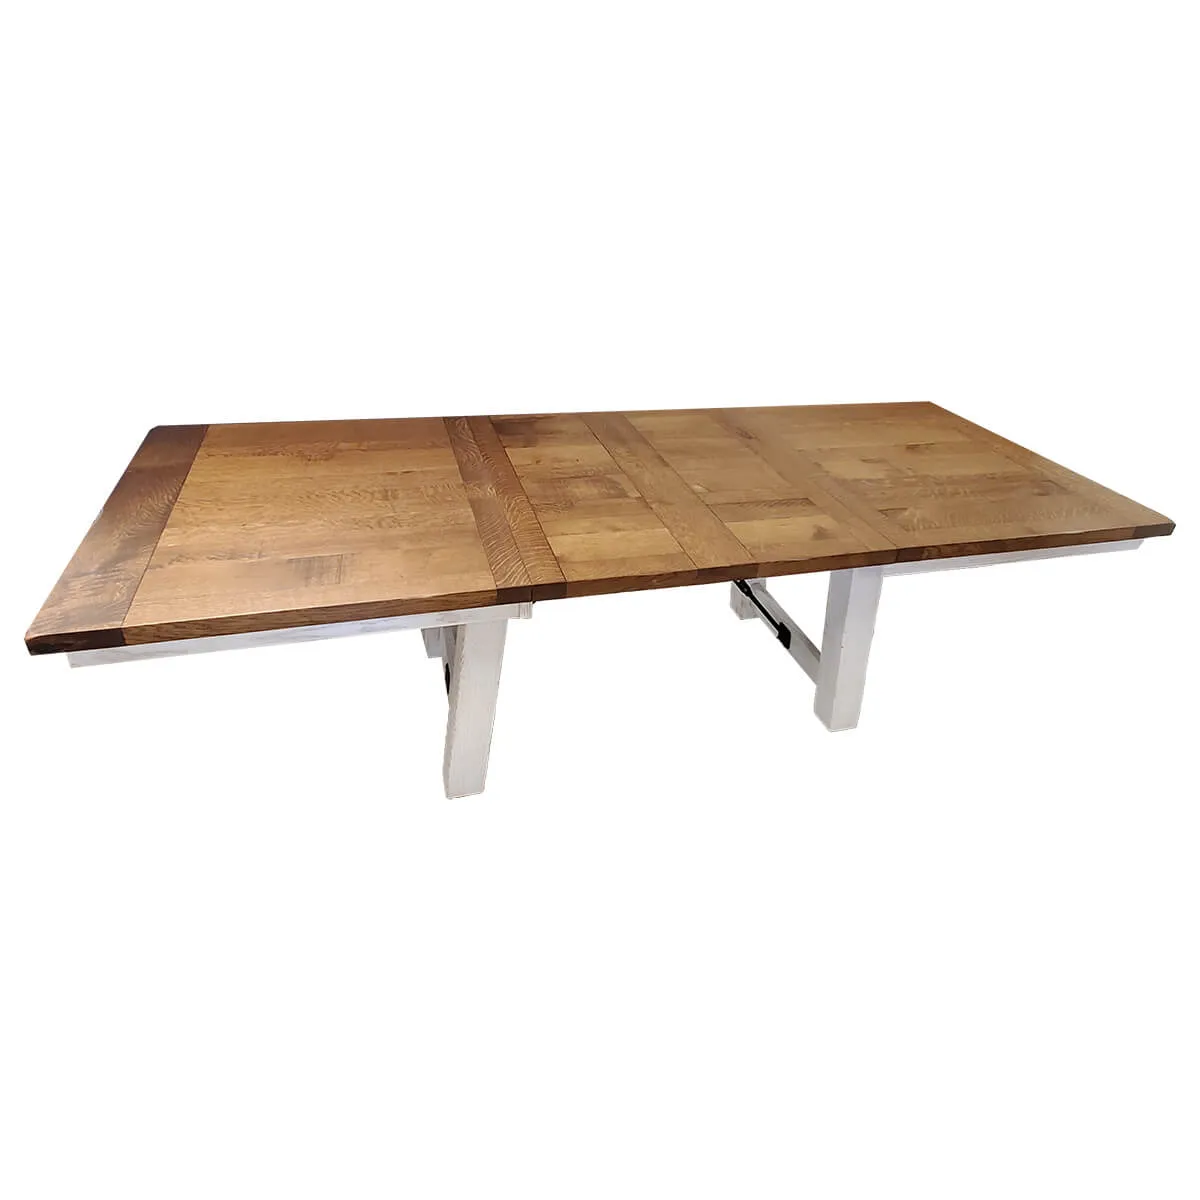 Settlers Trestle 42 Inch x 72 Inch Dining Table with Leaves